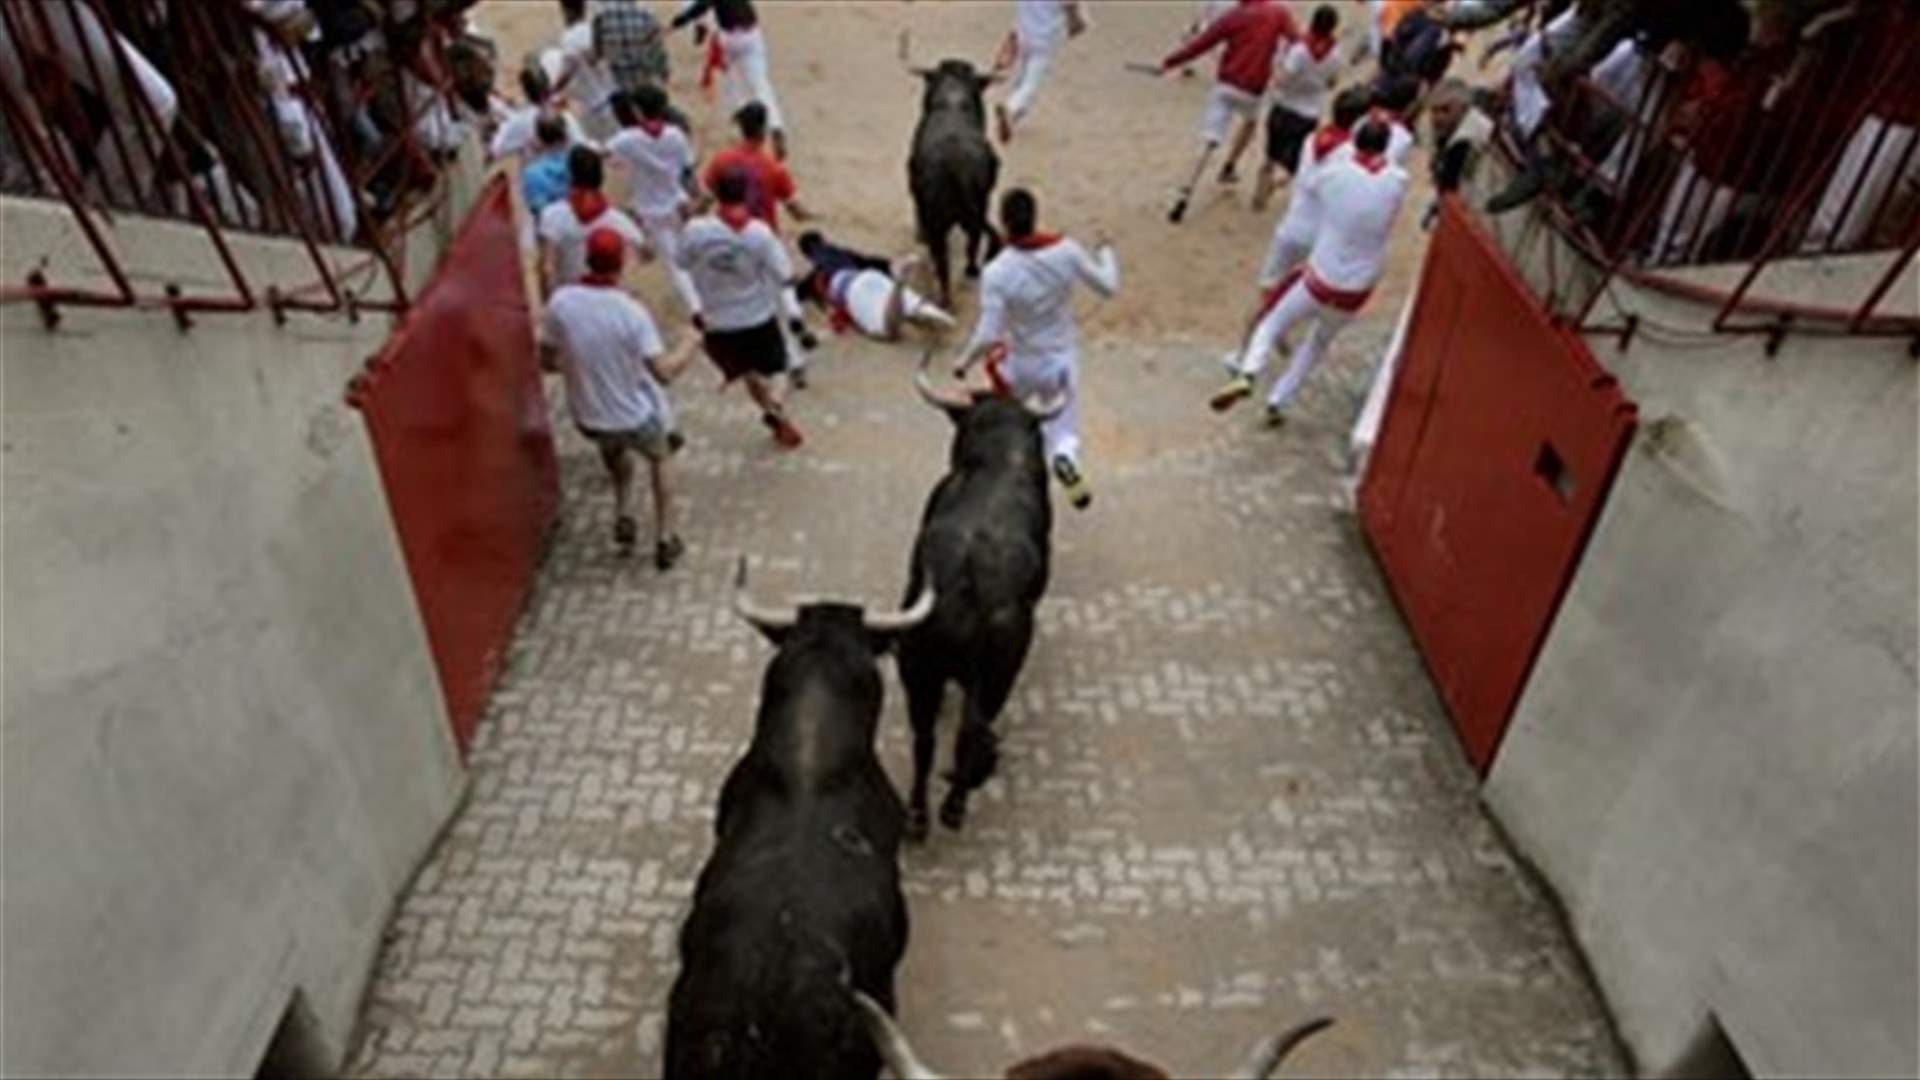 Two hurt on fourth day of Pamplona bull-run festival